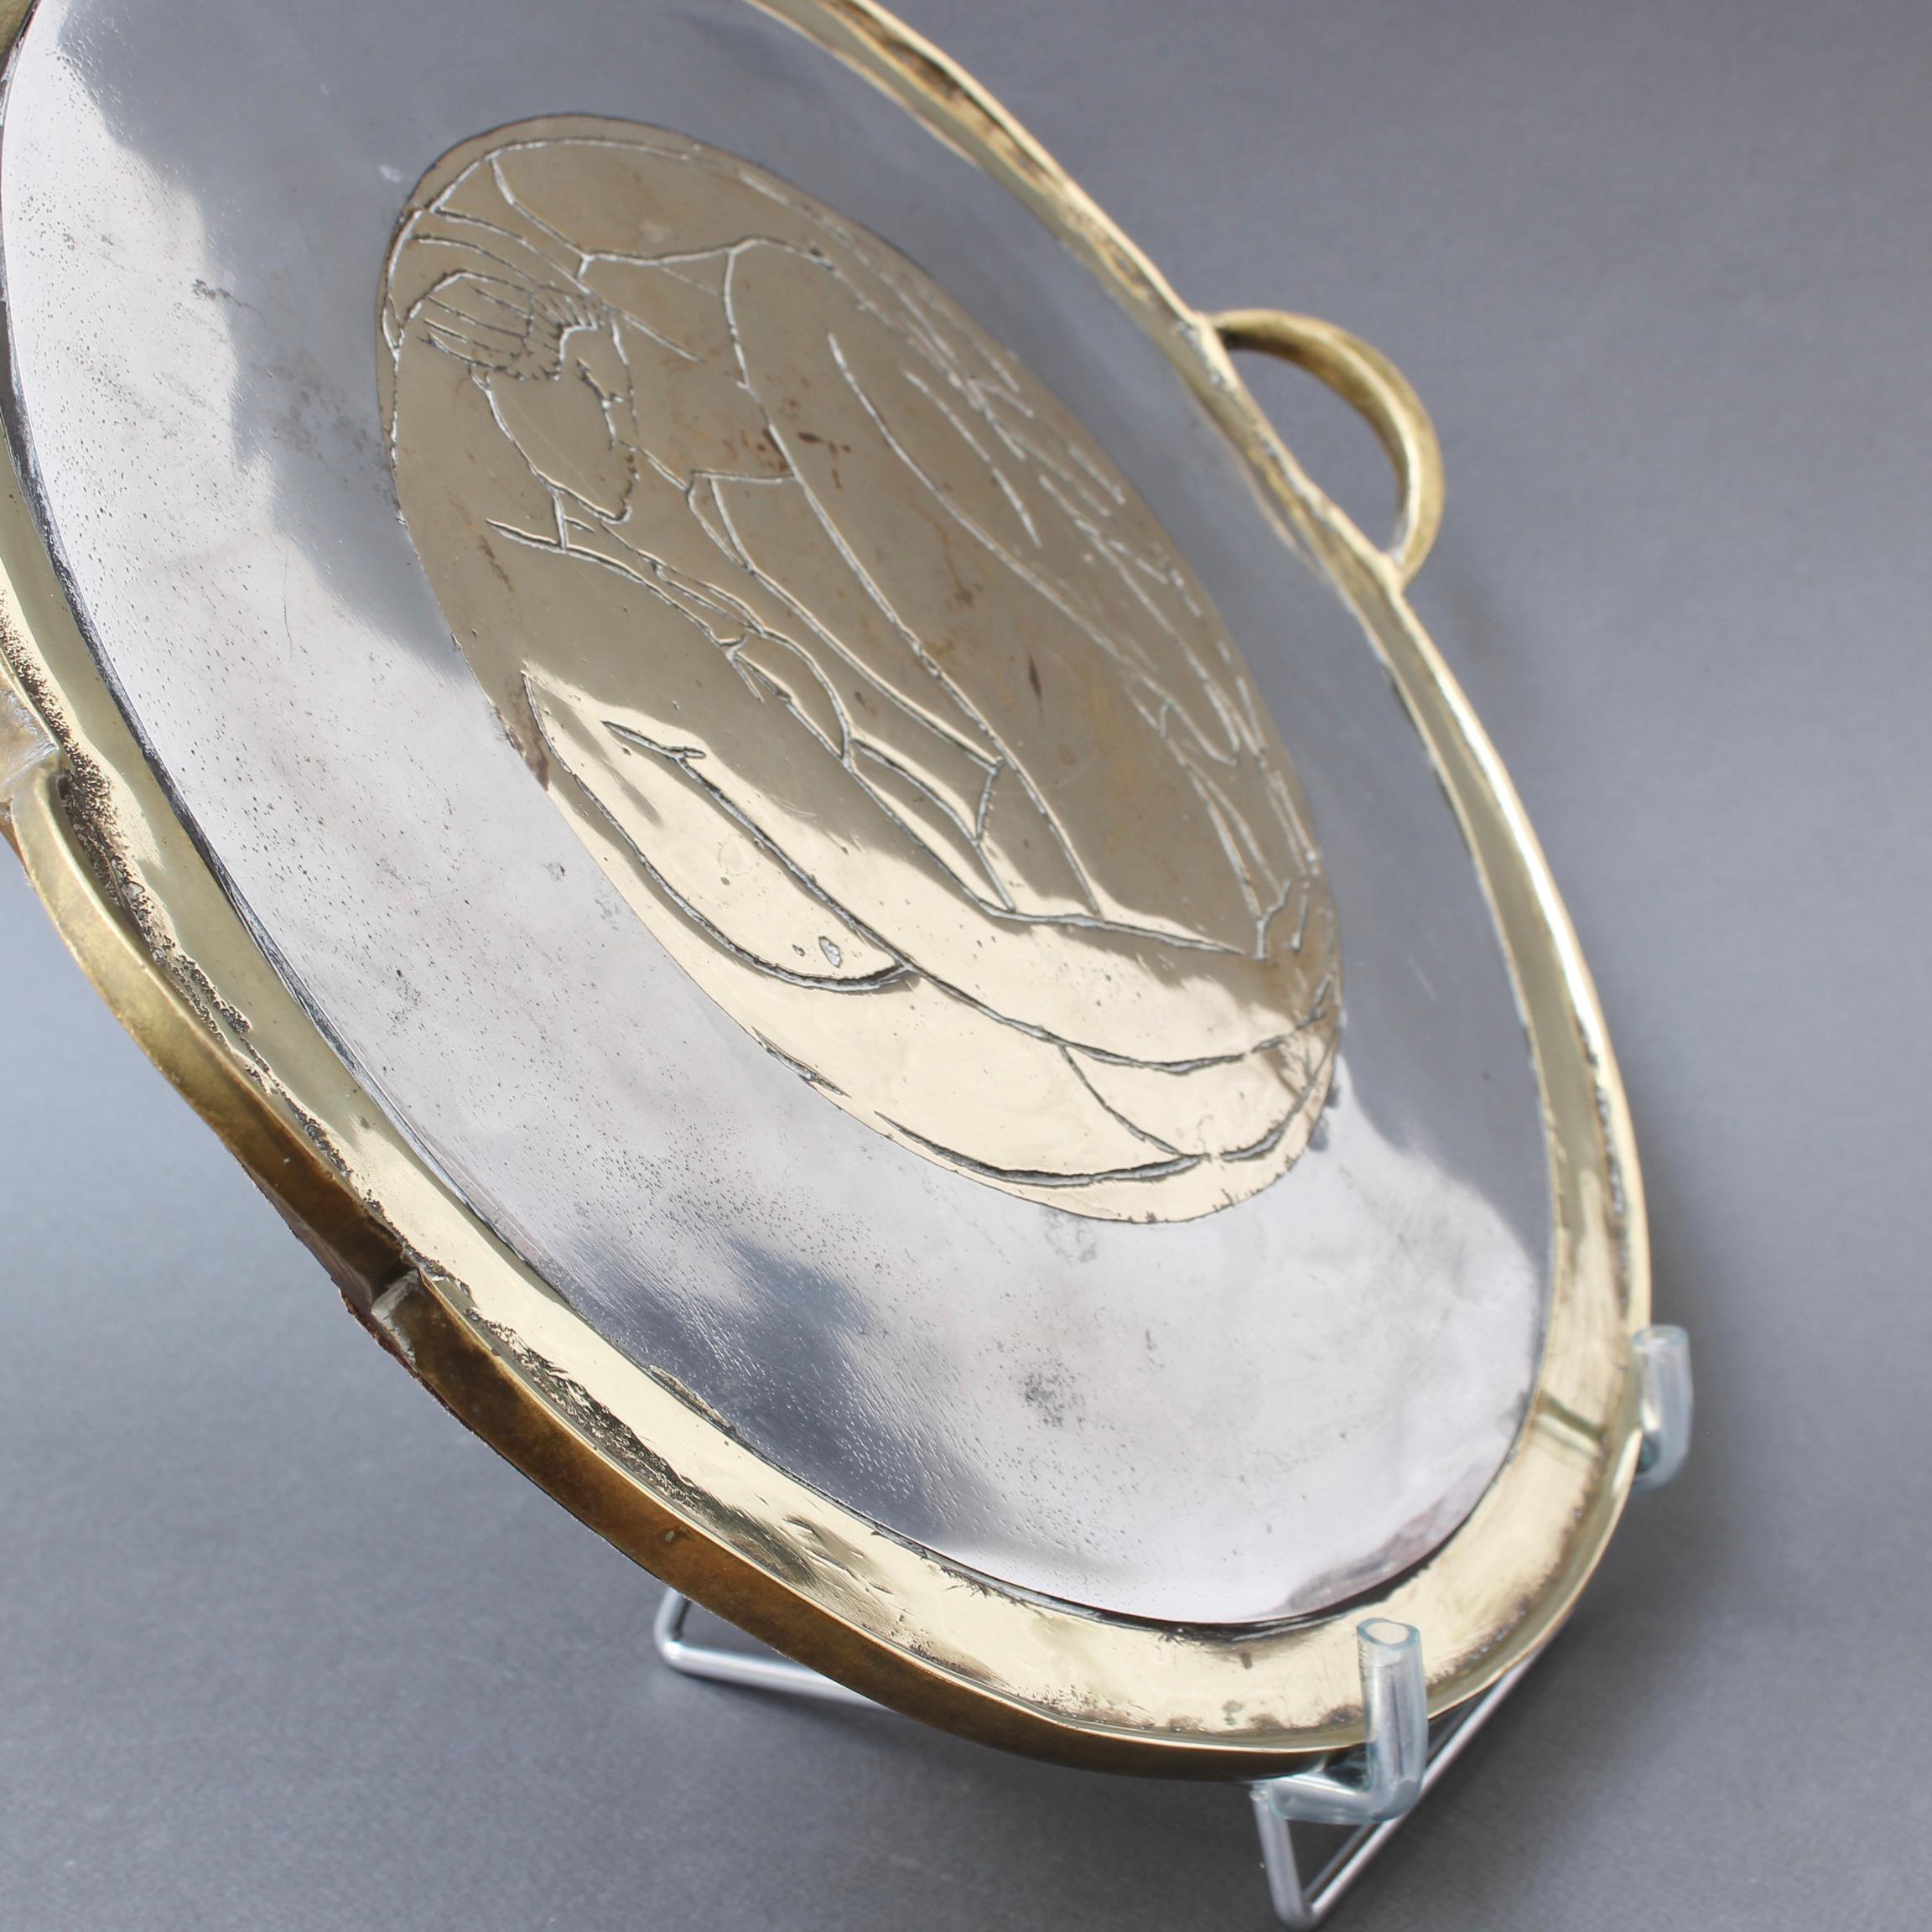 Aluminum Aluminium and Brass Brutalist Style Serving Tray by Leopold, 'circa 1970s'